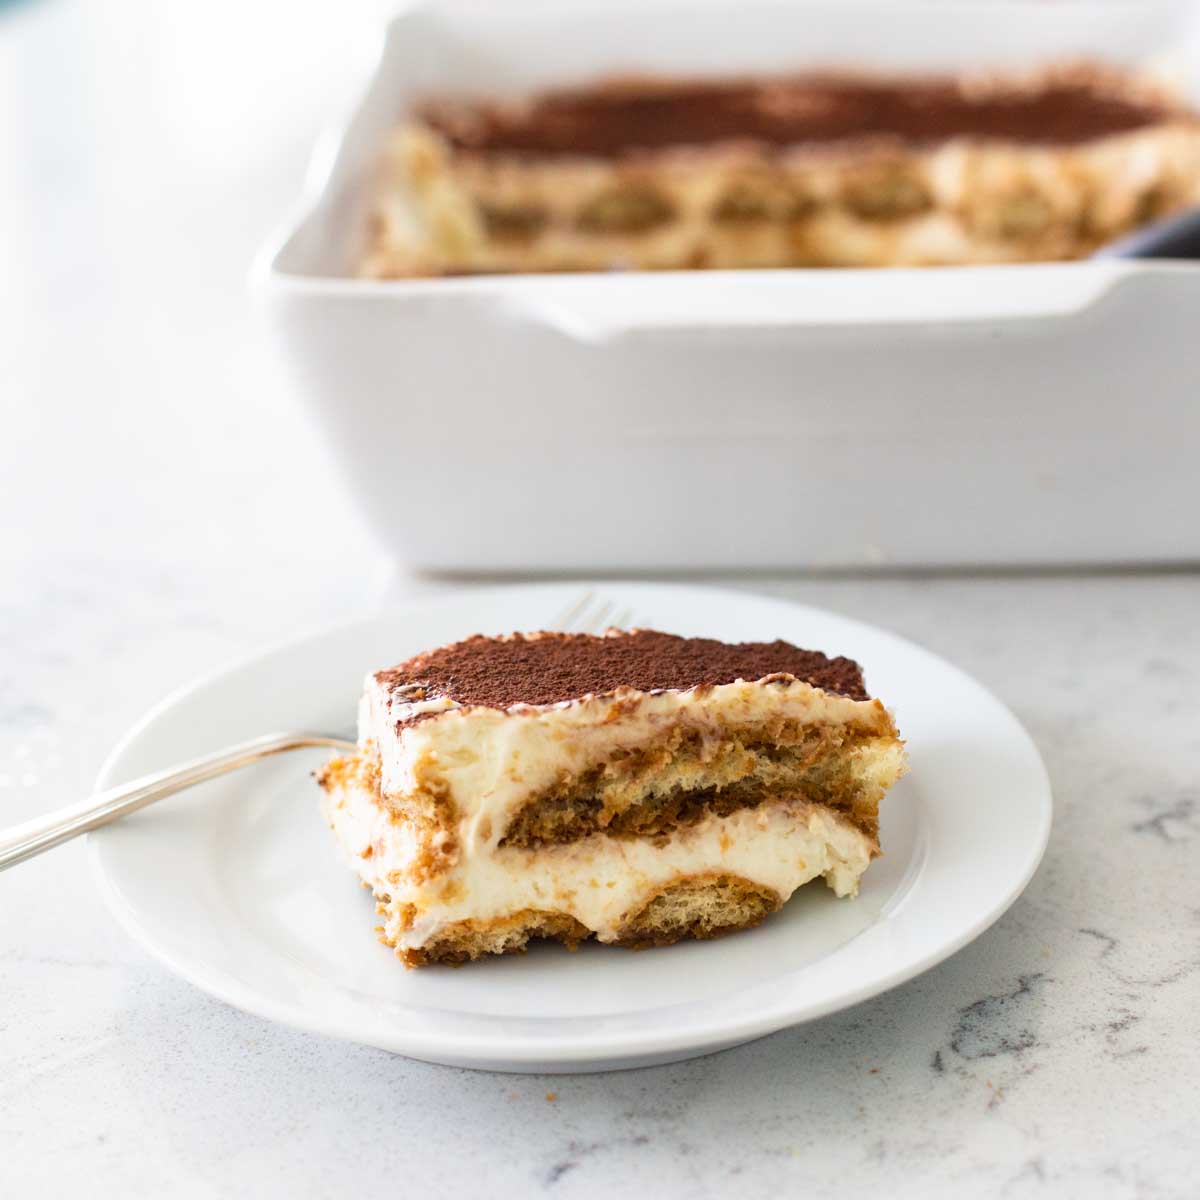 A serving of tiramisu is on a plate with a fork.